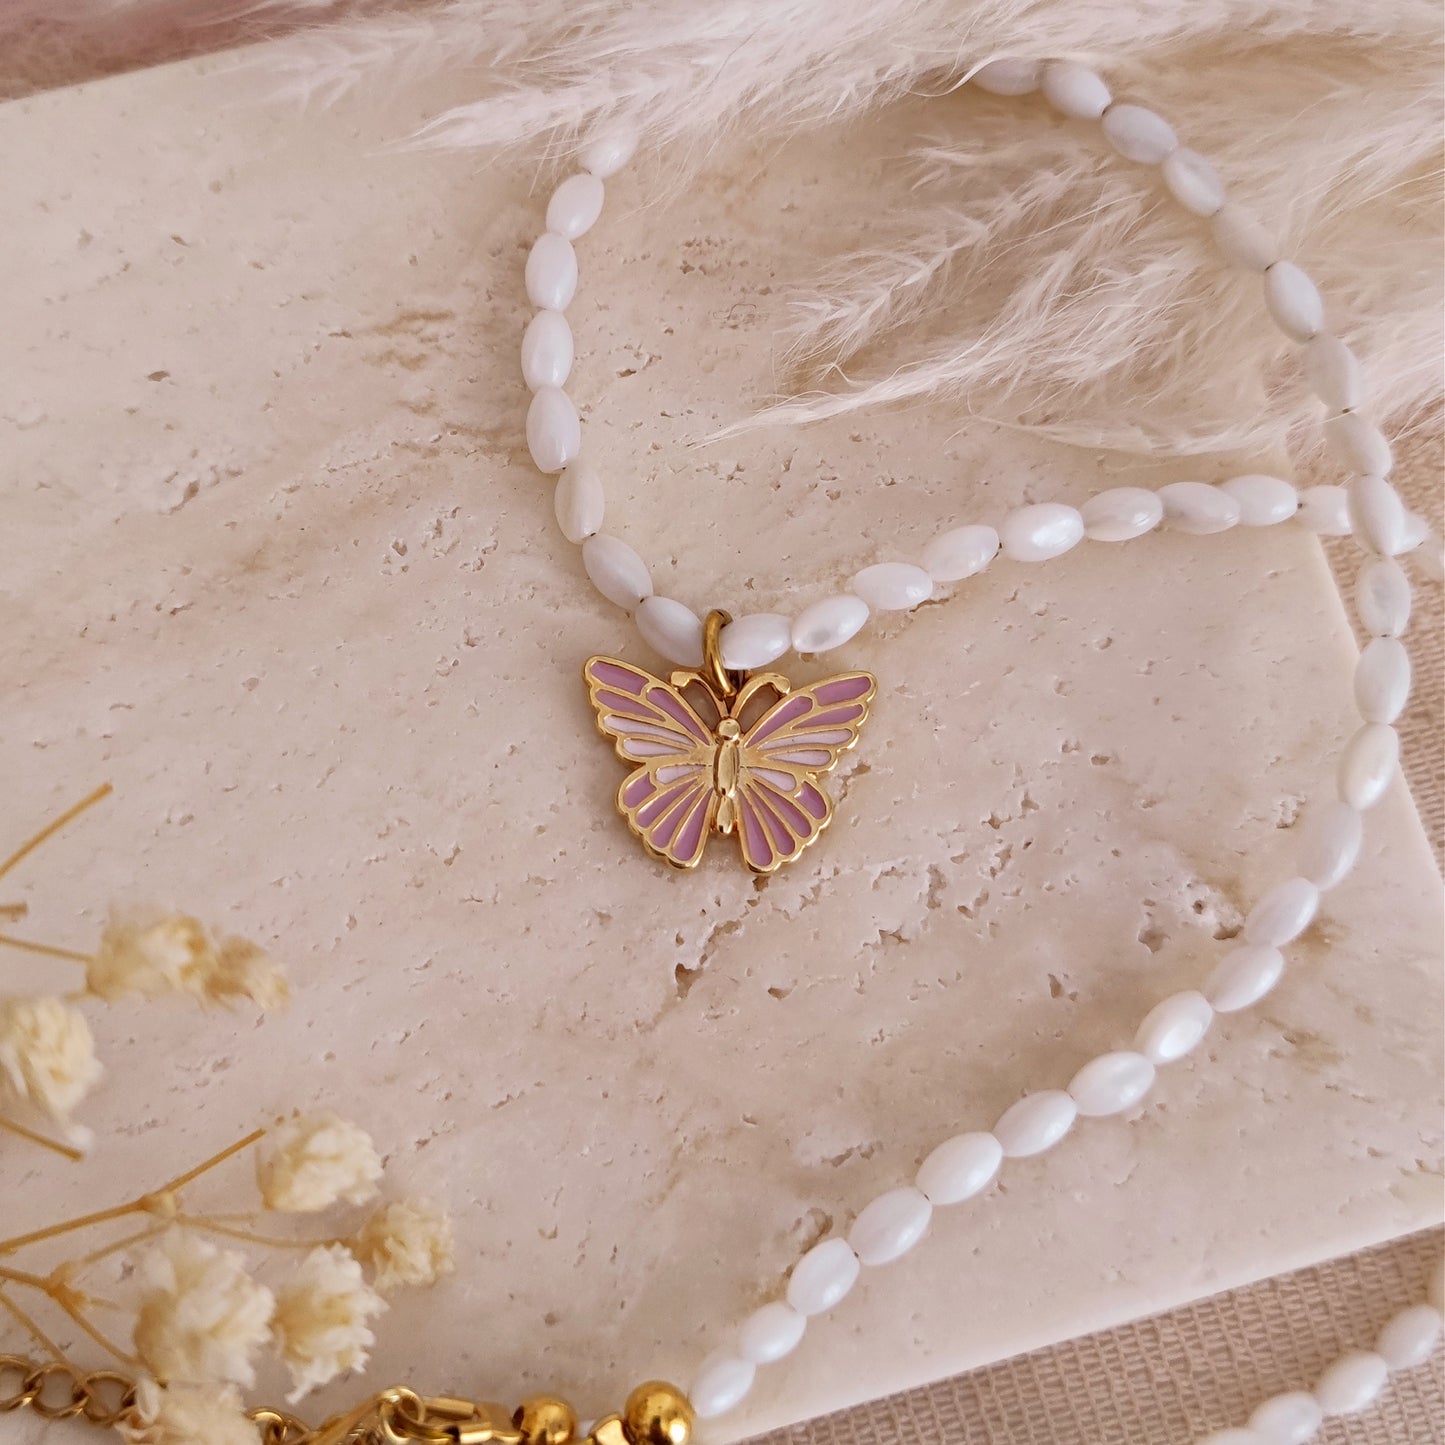 Fairycore Mother of Pearl Pearls and enamel Butterfly Necklace, Aesthetic Pastel Beaded Necklace, Indie 90's Y2k Jewelry // CLARY